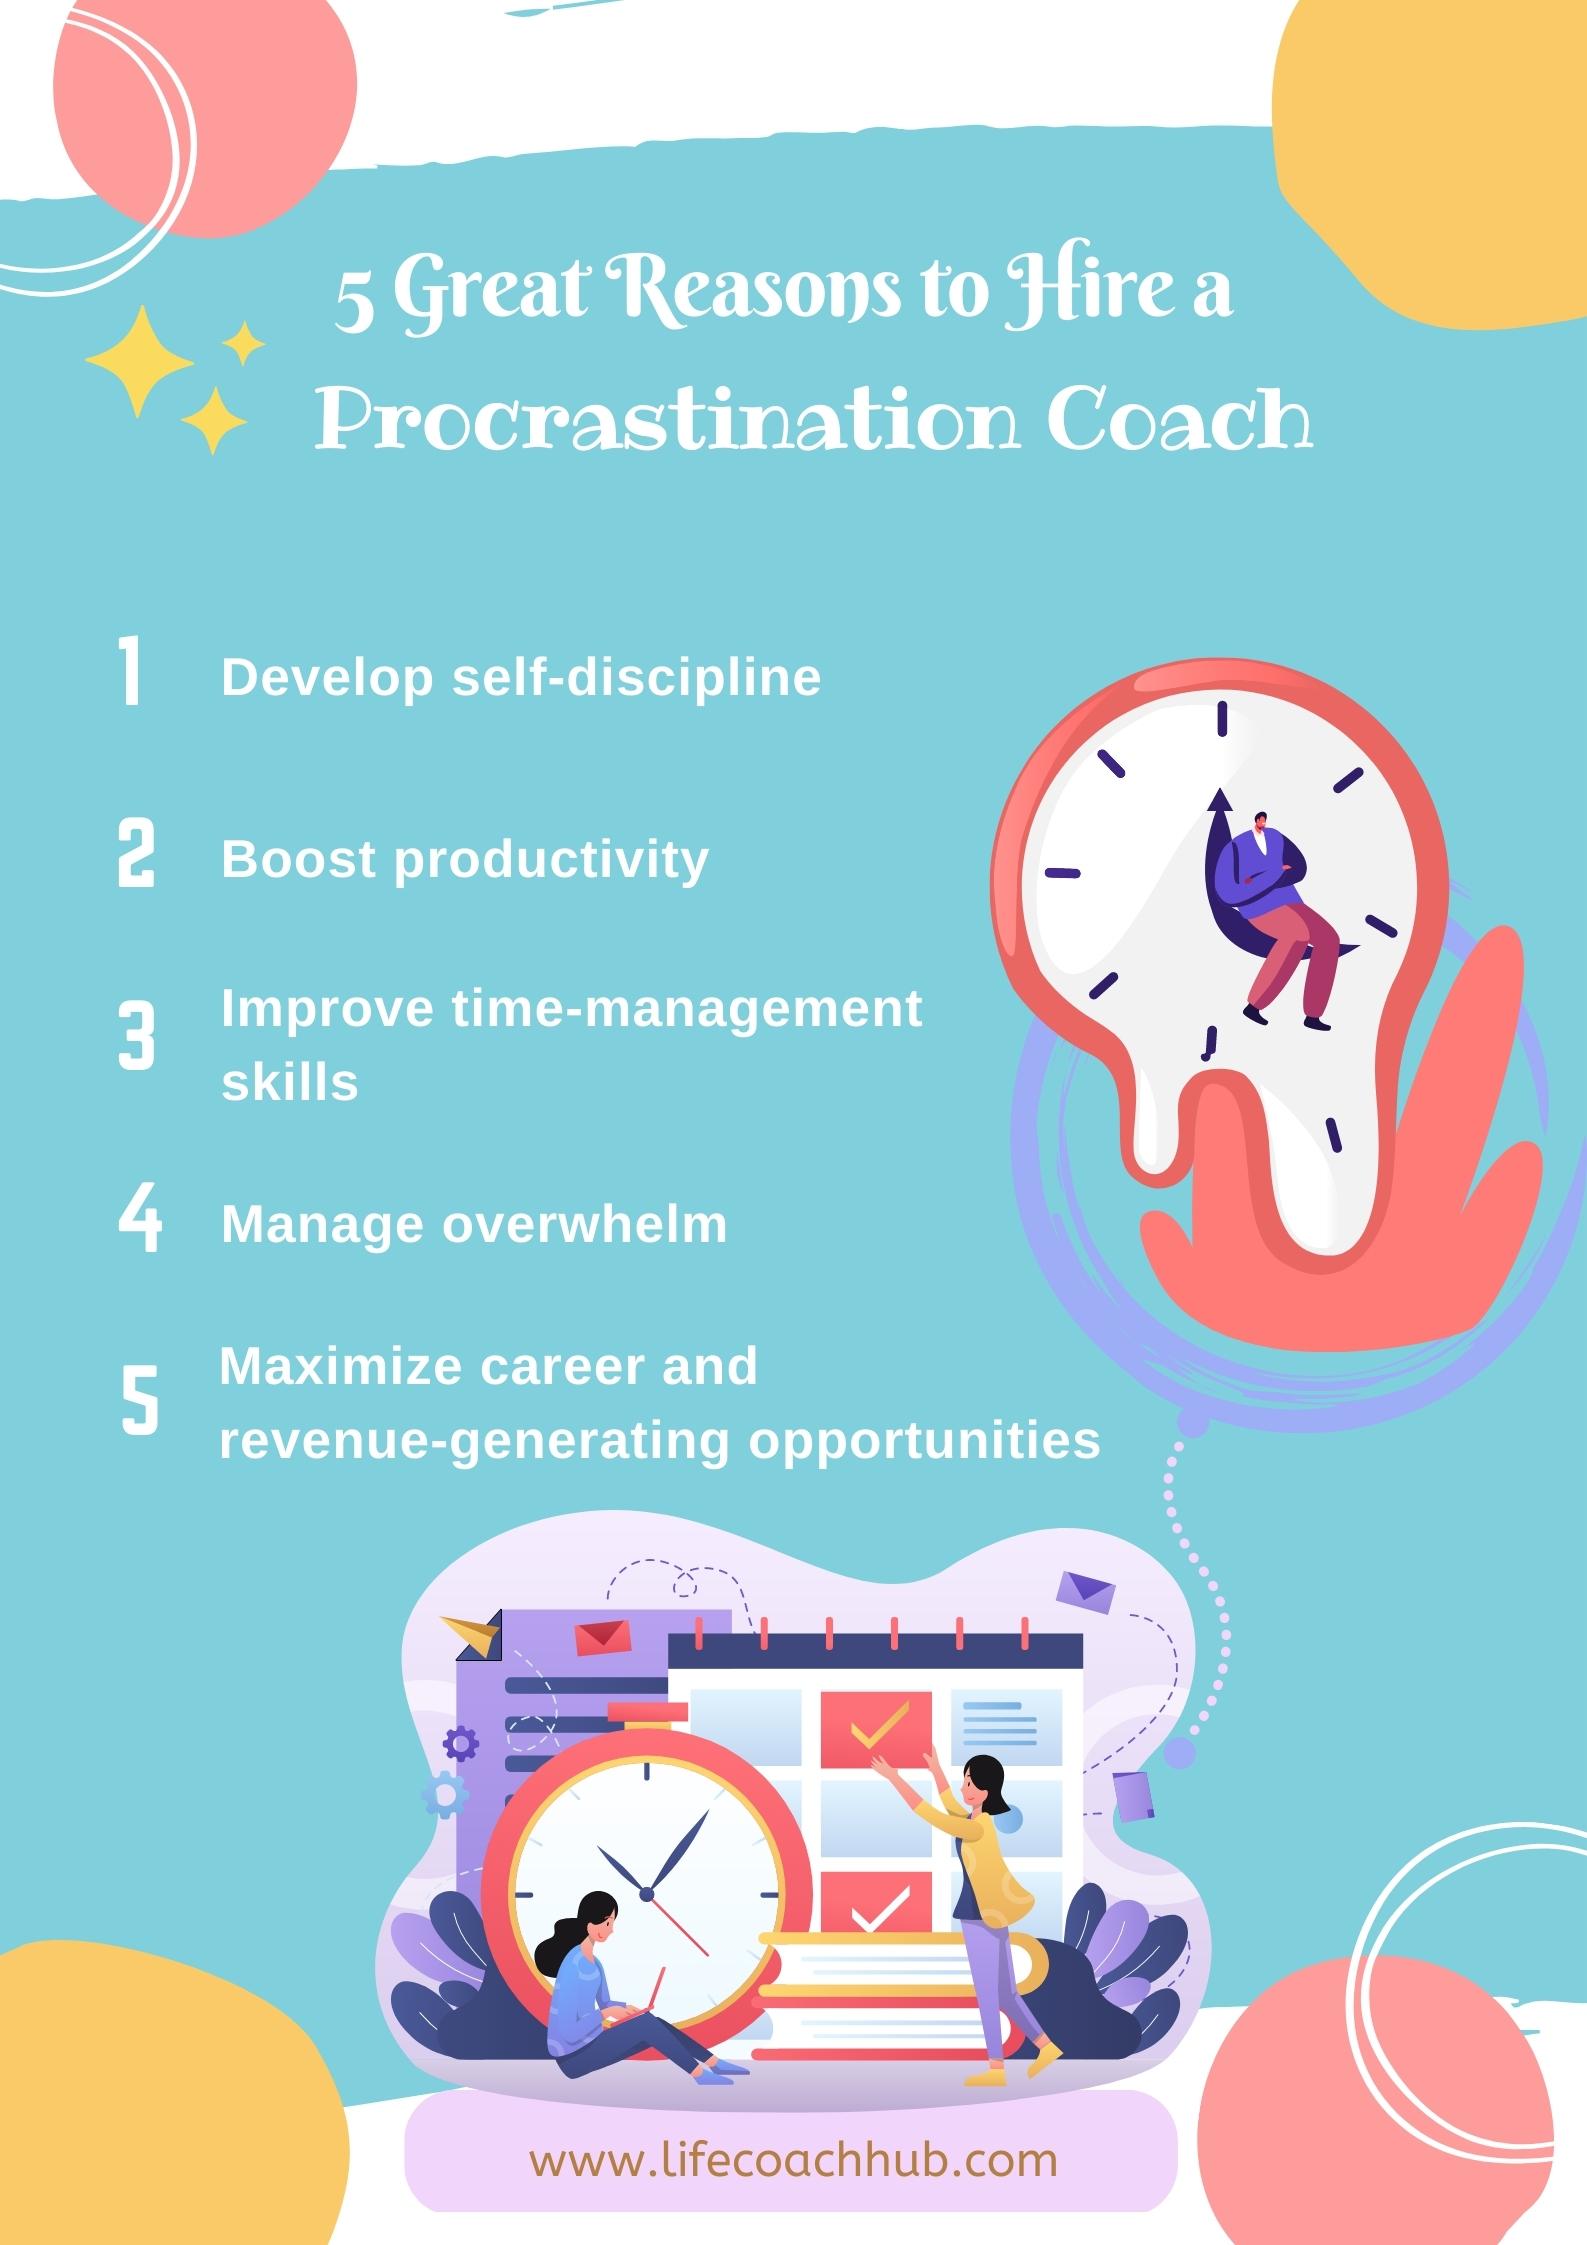 5 Great reasons to hire a procrastination coach